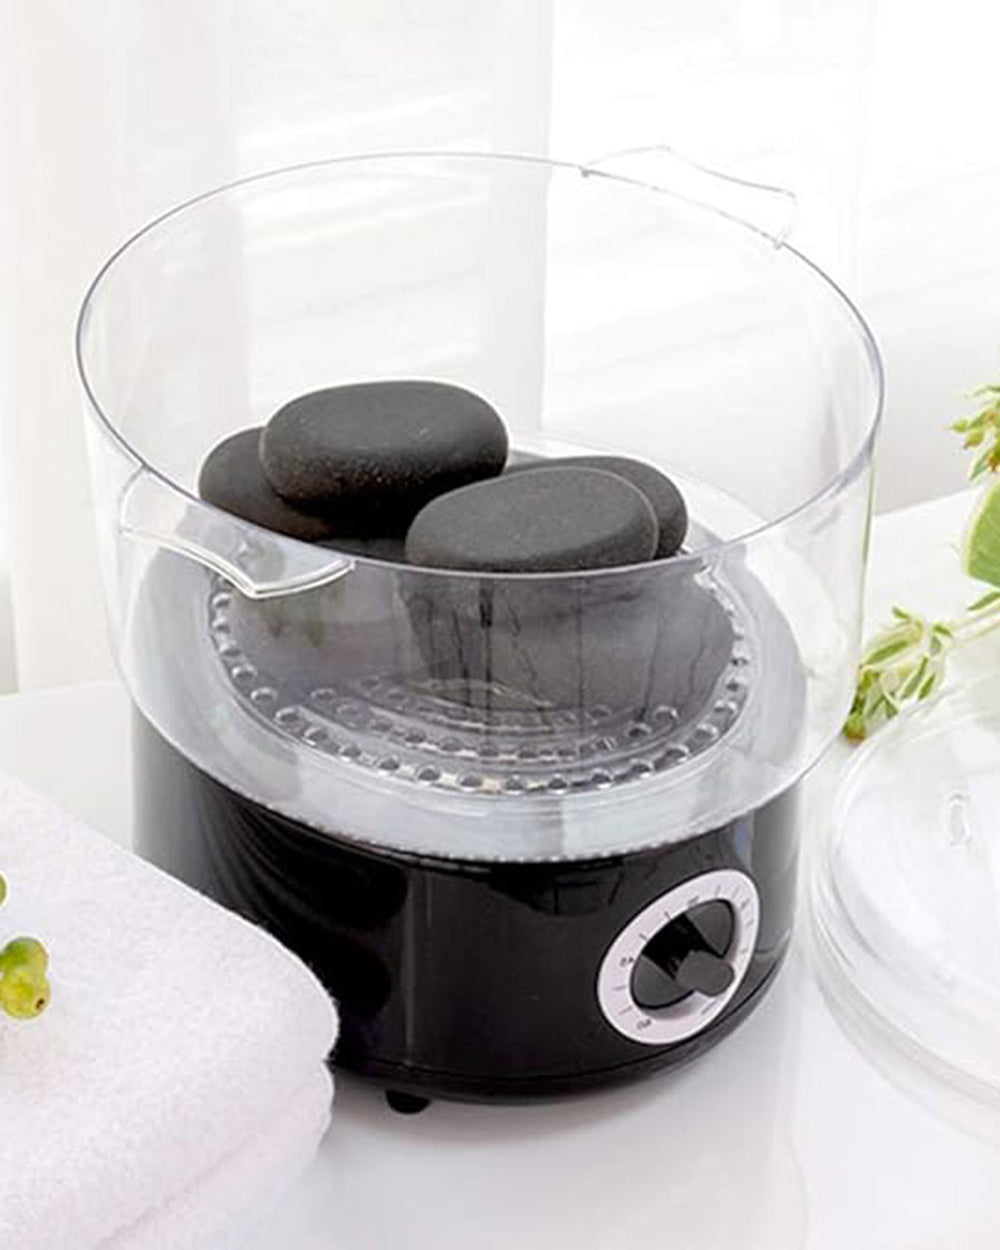 KKTECT Quick Heating Towel Steamer for Home Beauty Salon